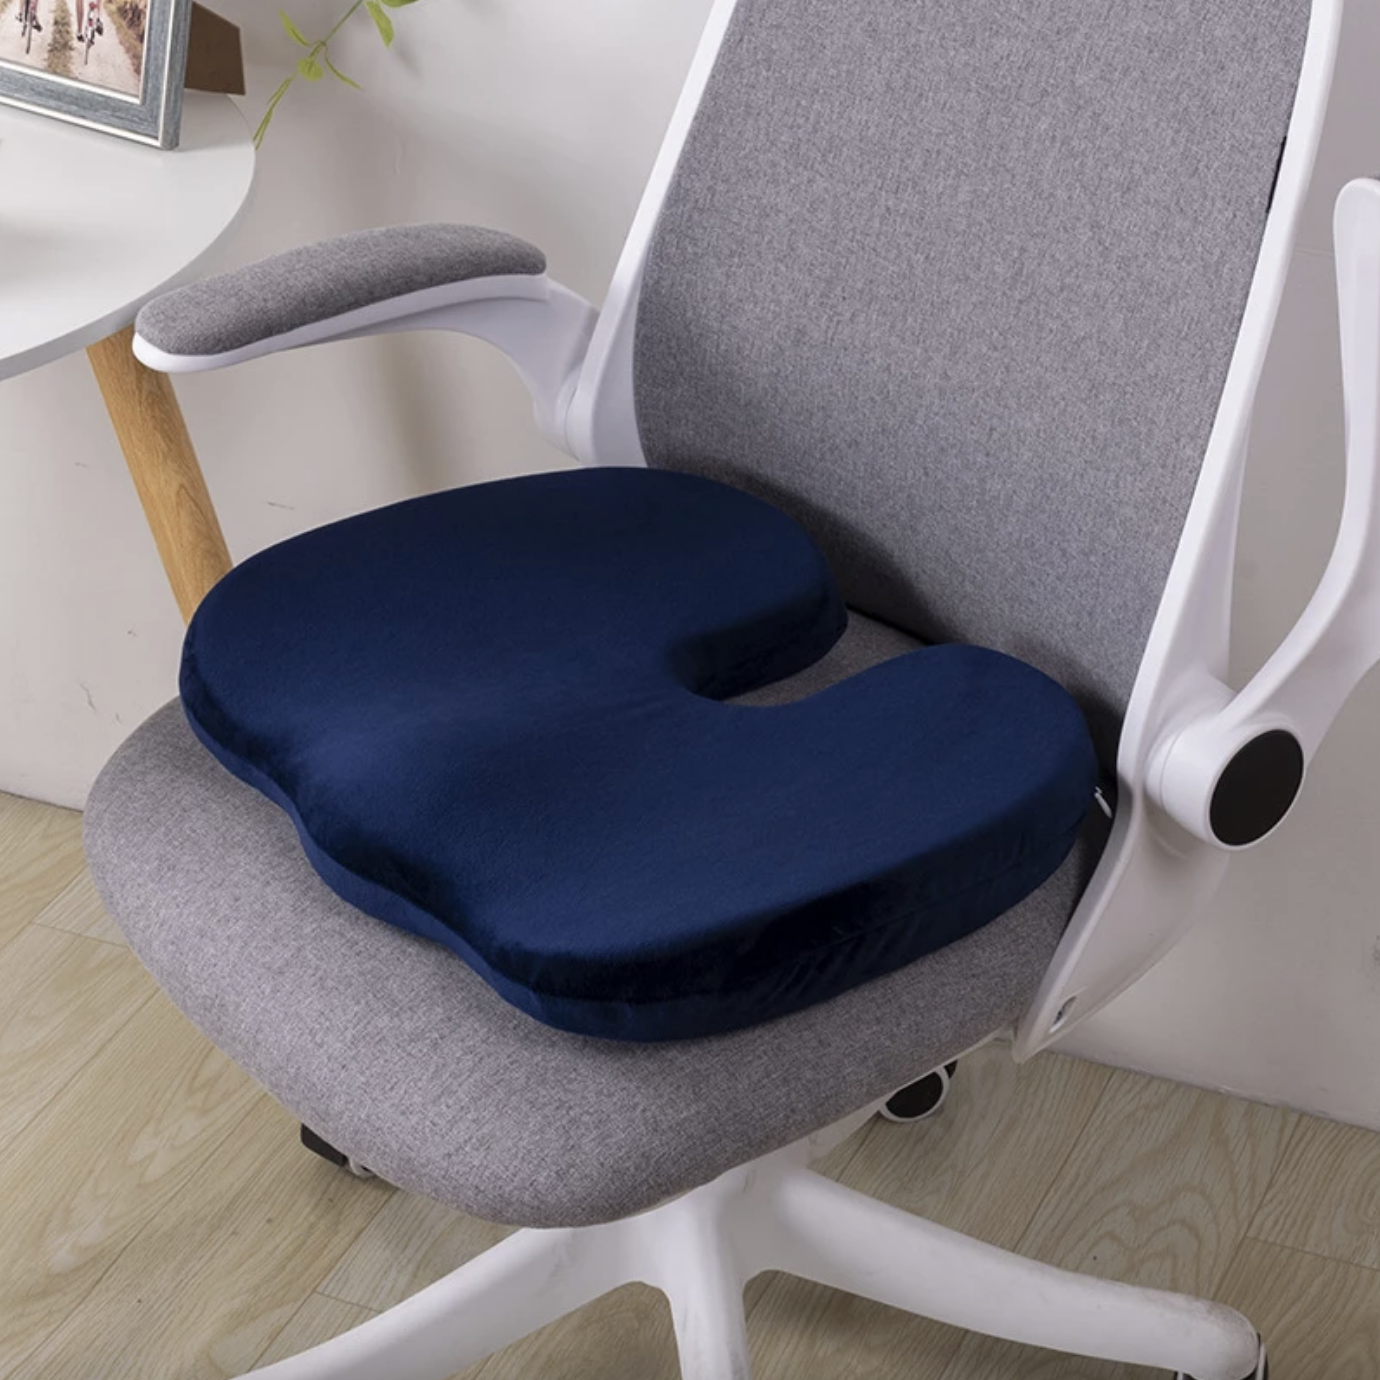 50% off on Contoured Office Chair Pillow | OneDayOnly